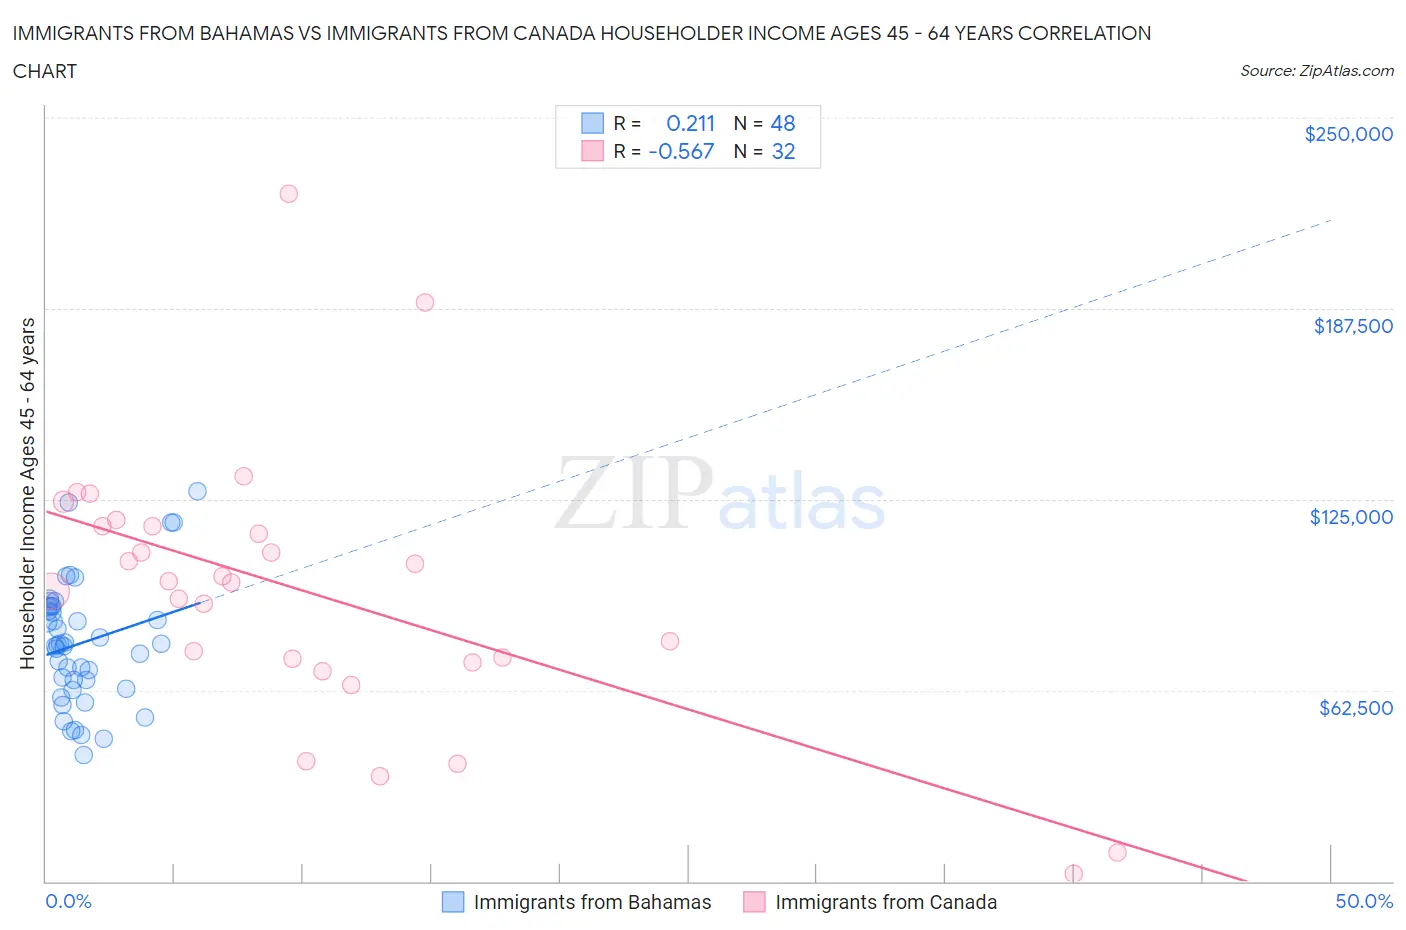 Immigrants from Bahamas vs Immigrants from Canada Householder Income Ages 45 - 64 years